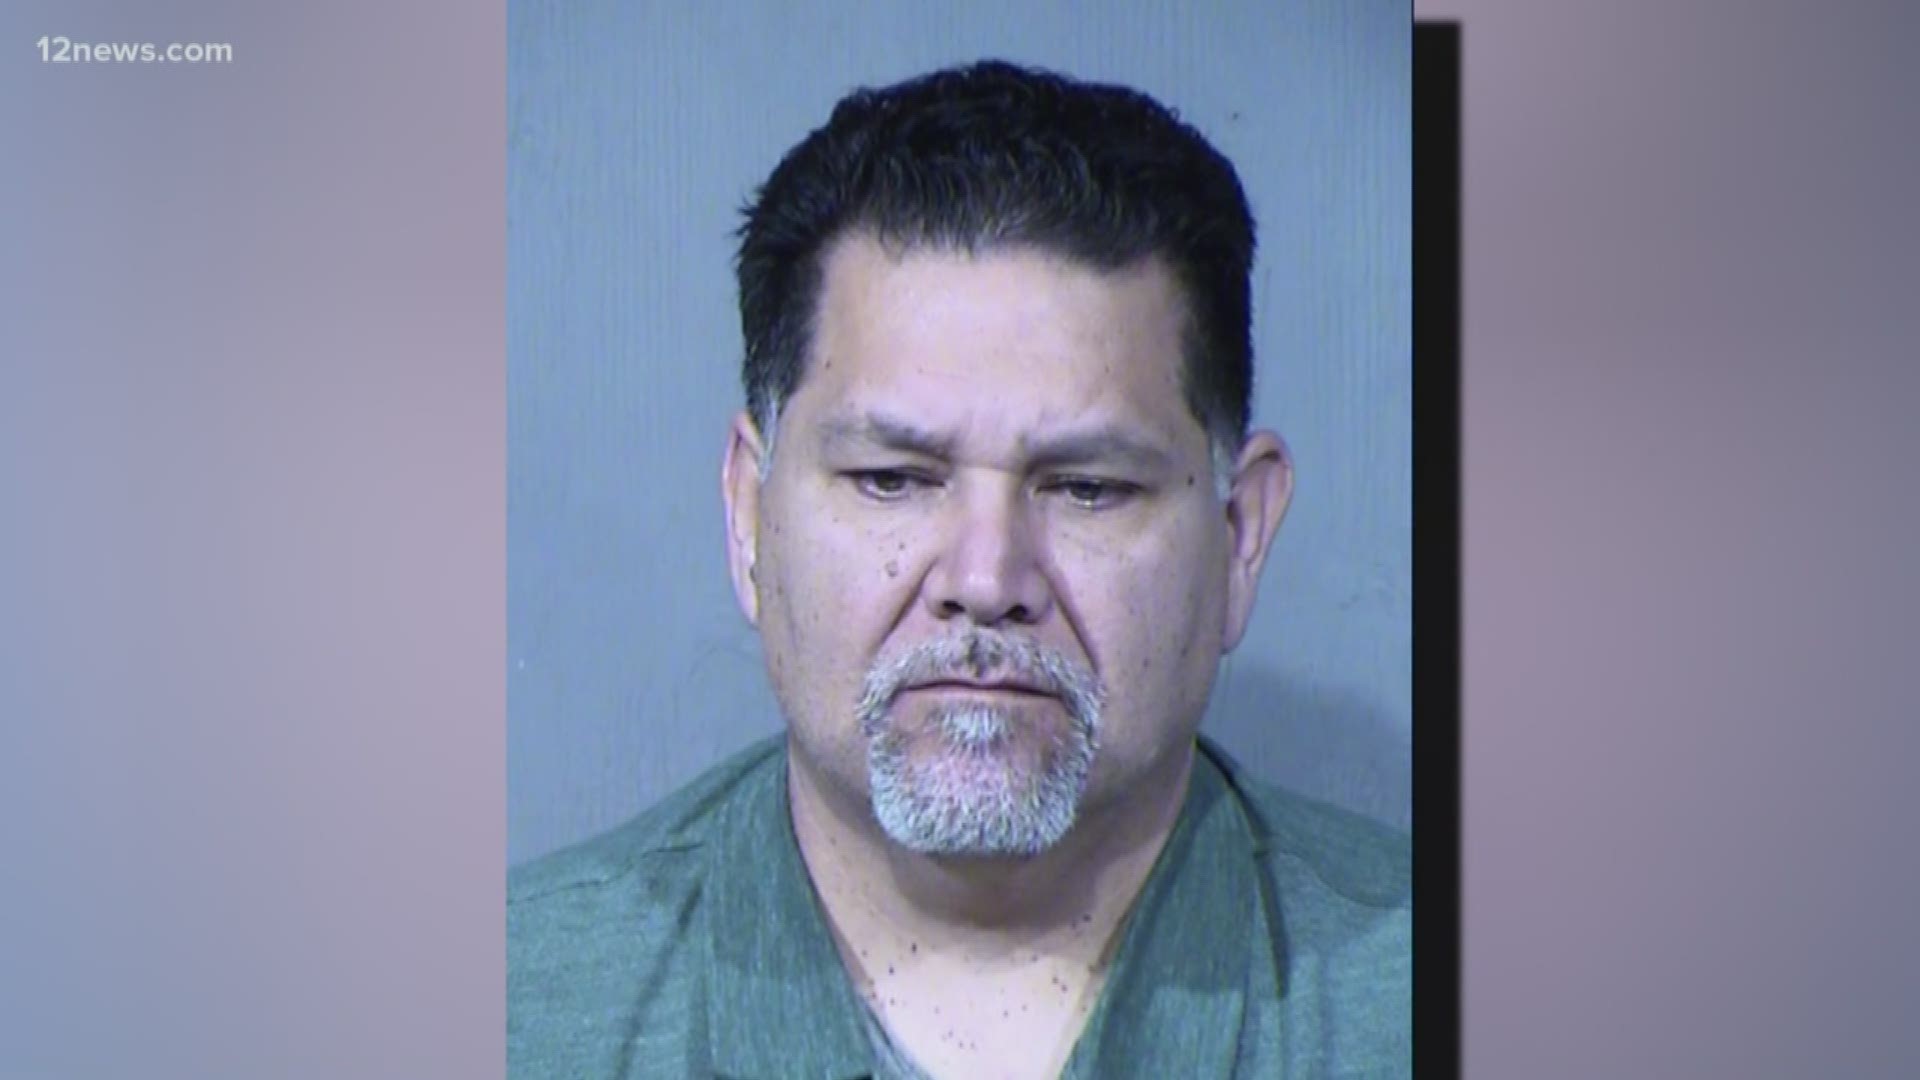 Police say at least three students came forward earlier this week accusing Manuel Gavina, a teacher at Capitol Elementary, of groping them.